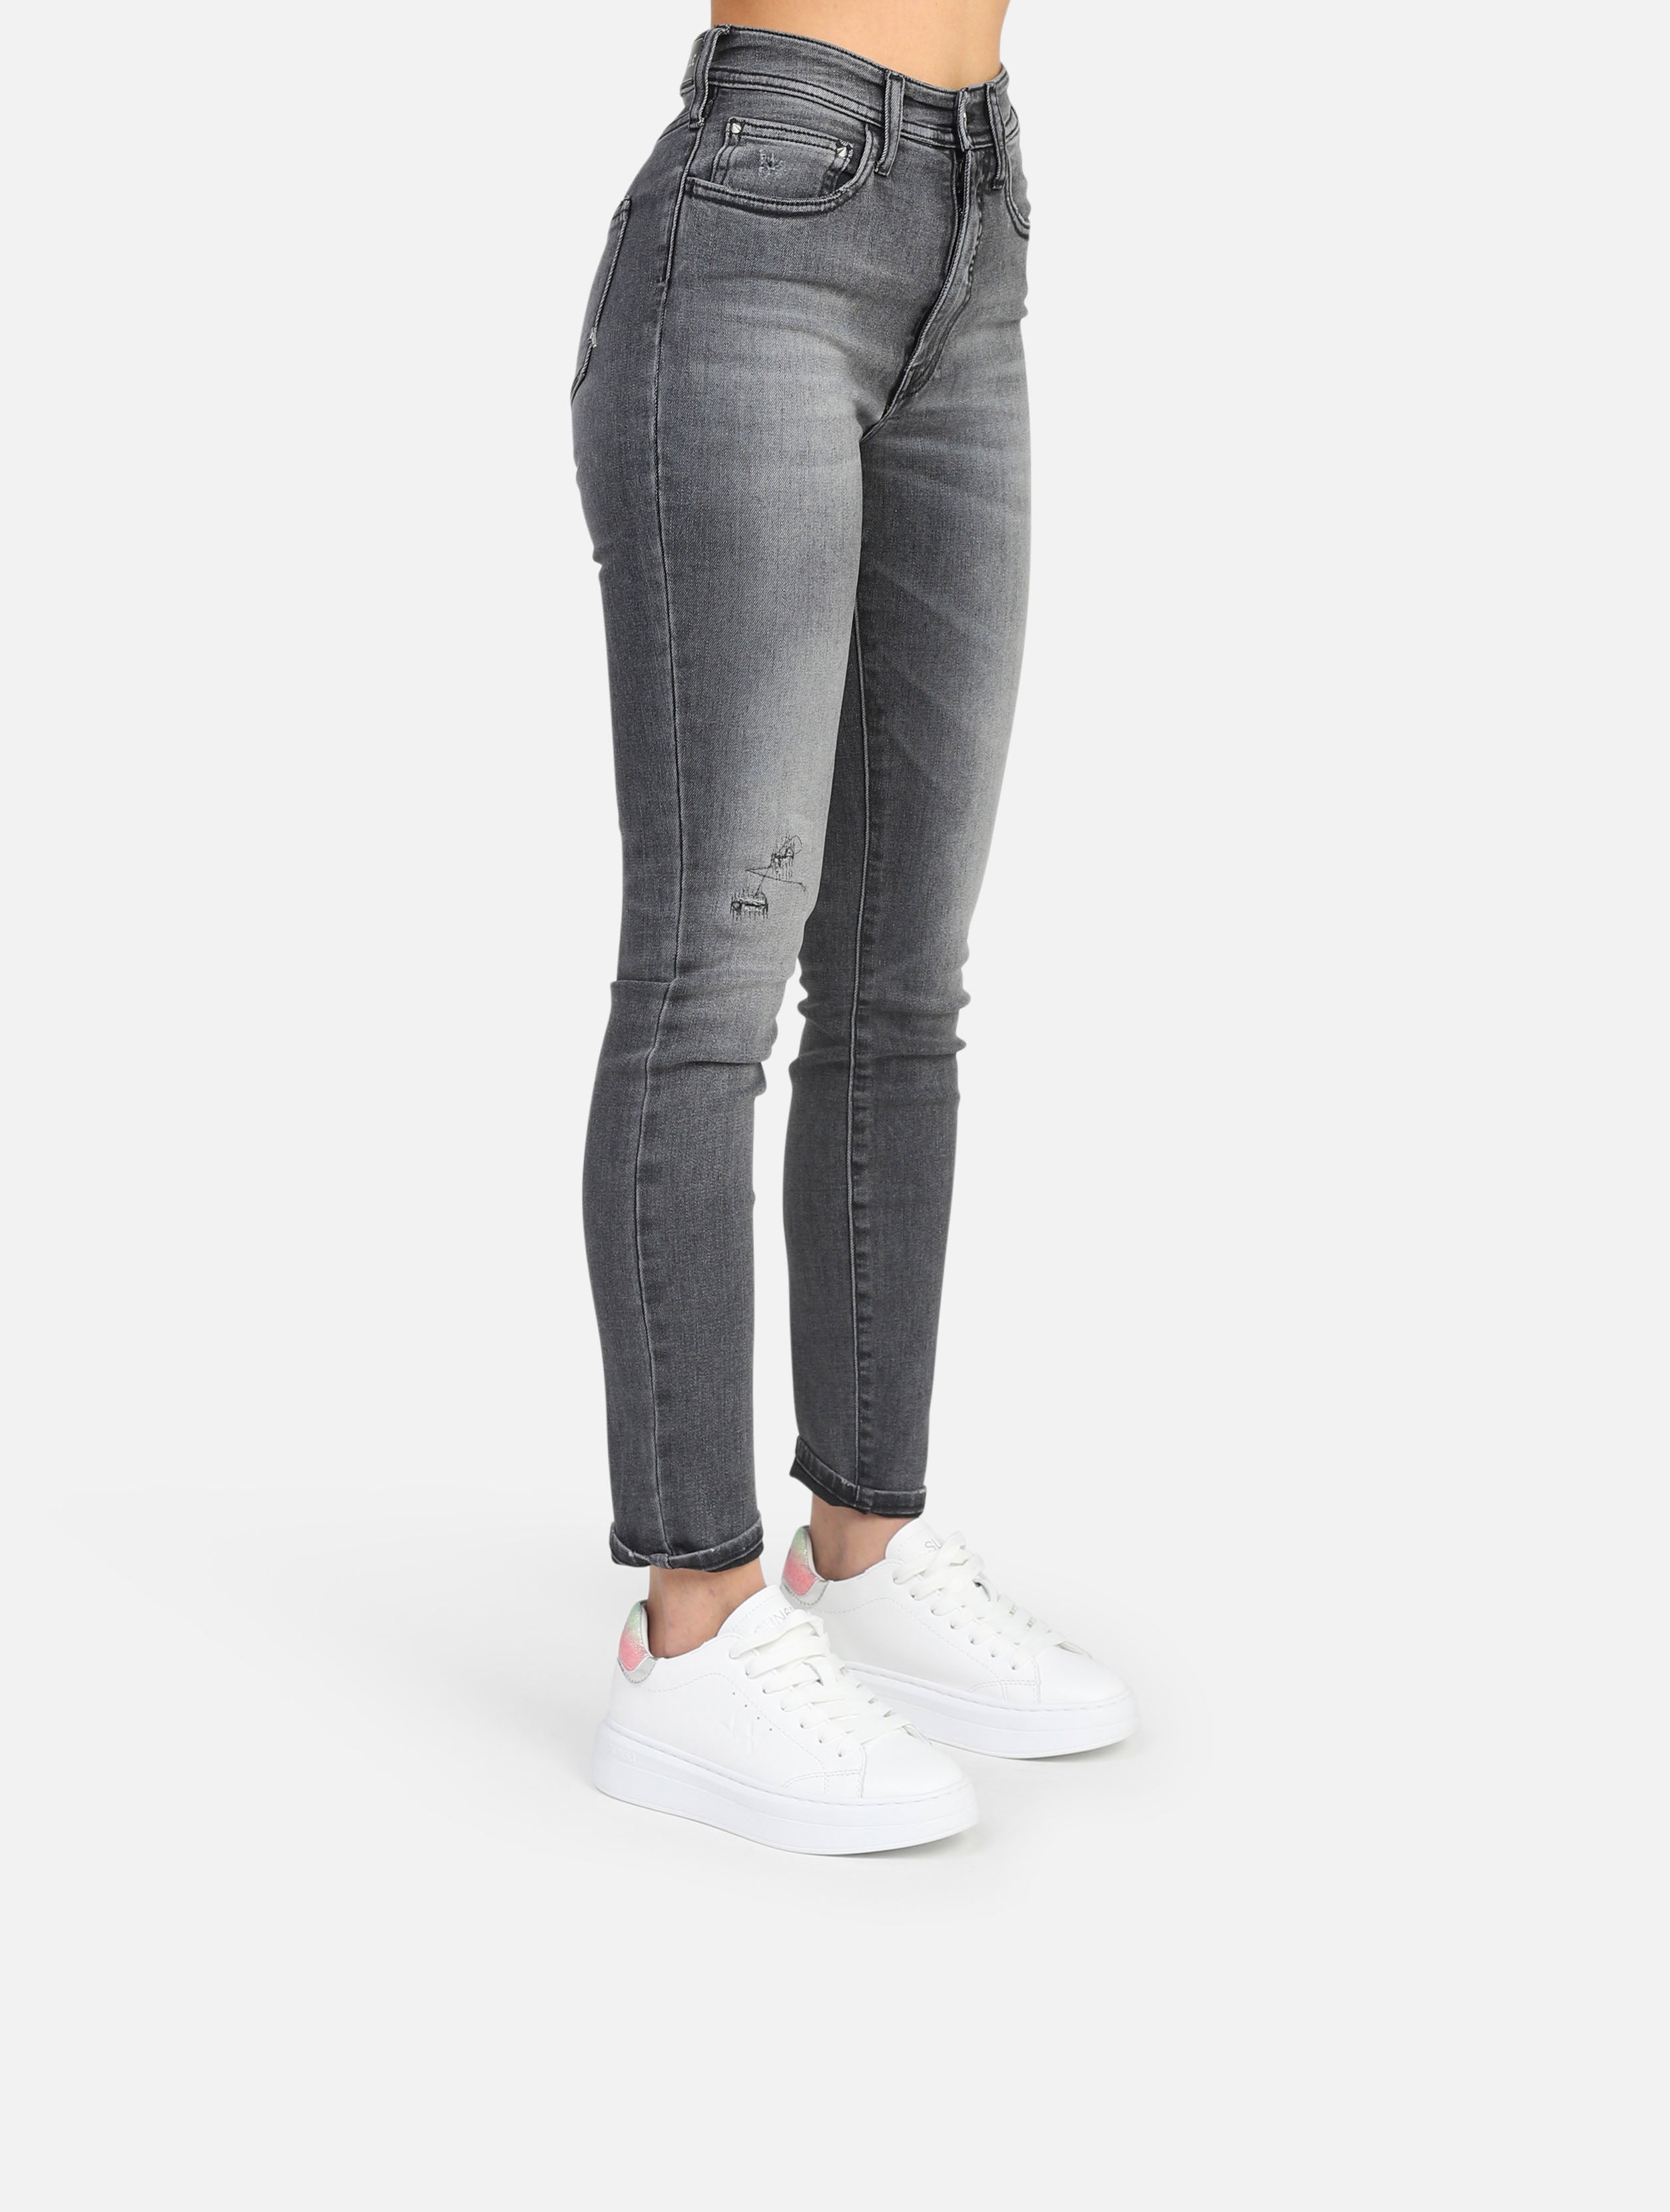 Jeans cycle  -  grigio scuro woman  - 2